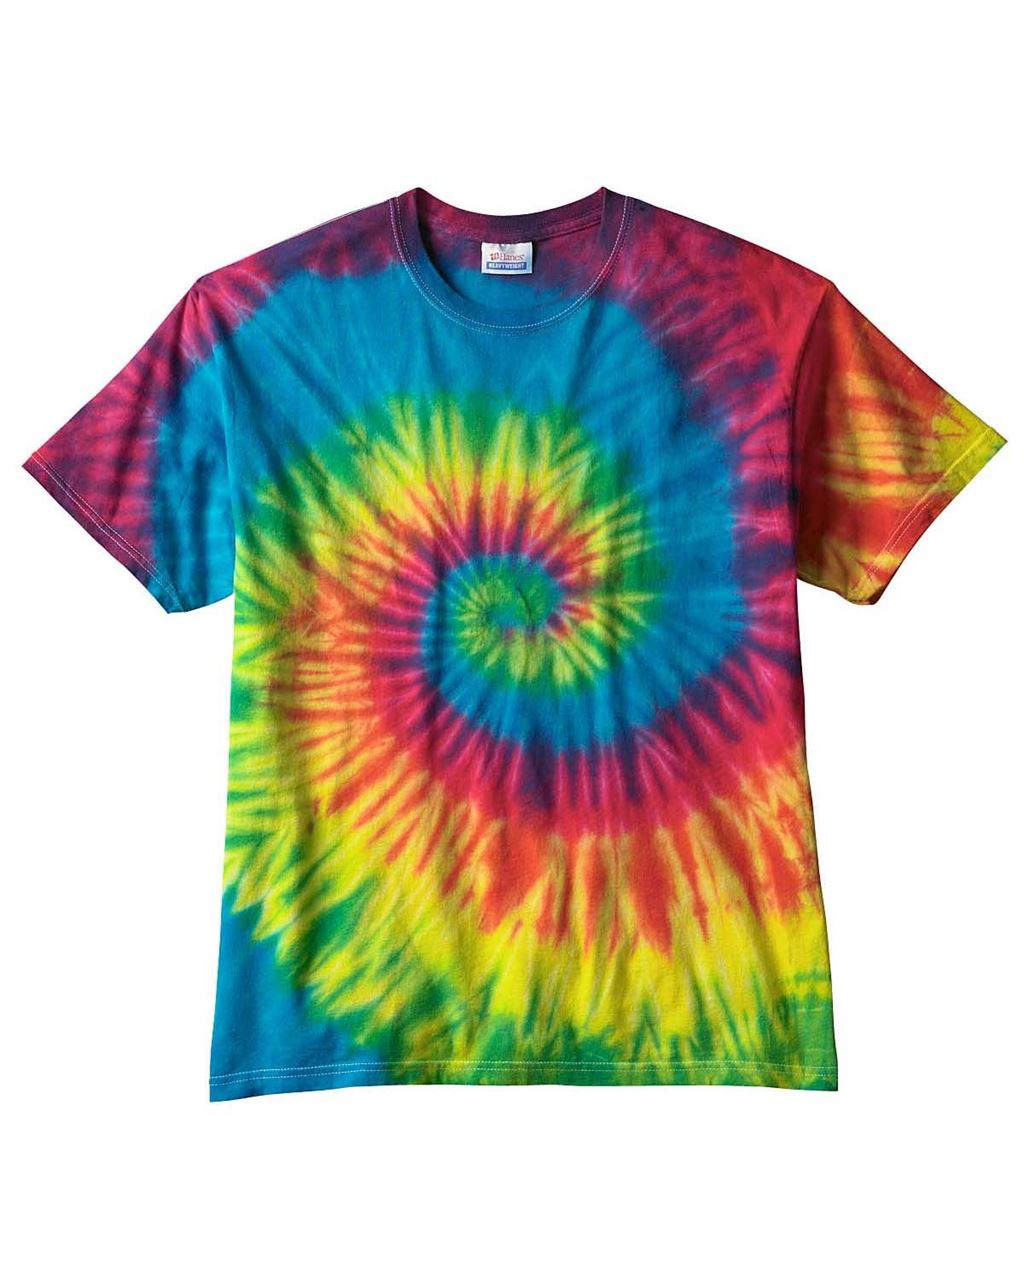 Baker men custom tie dye t shirts zara shop online, Short and tight homecoming dresses, high waisted lace up skirt. 